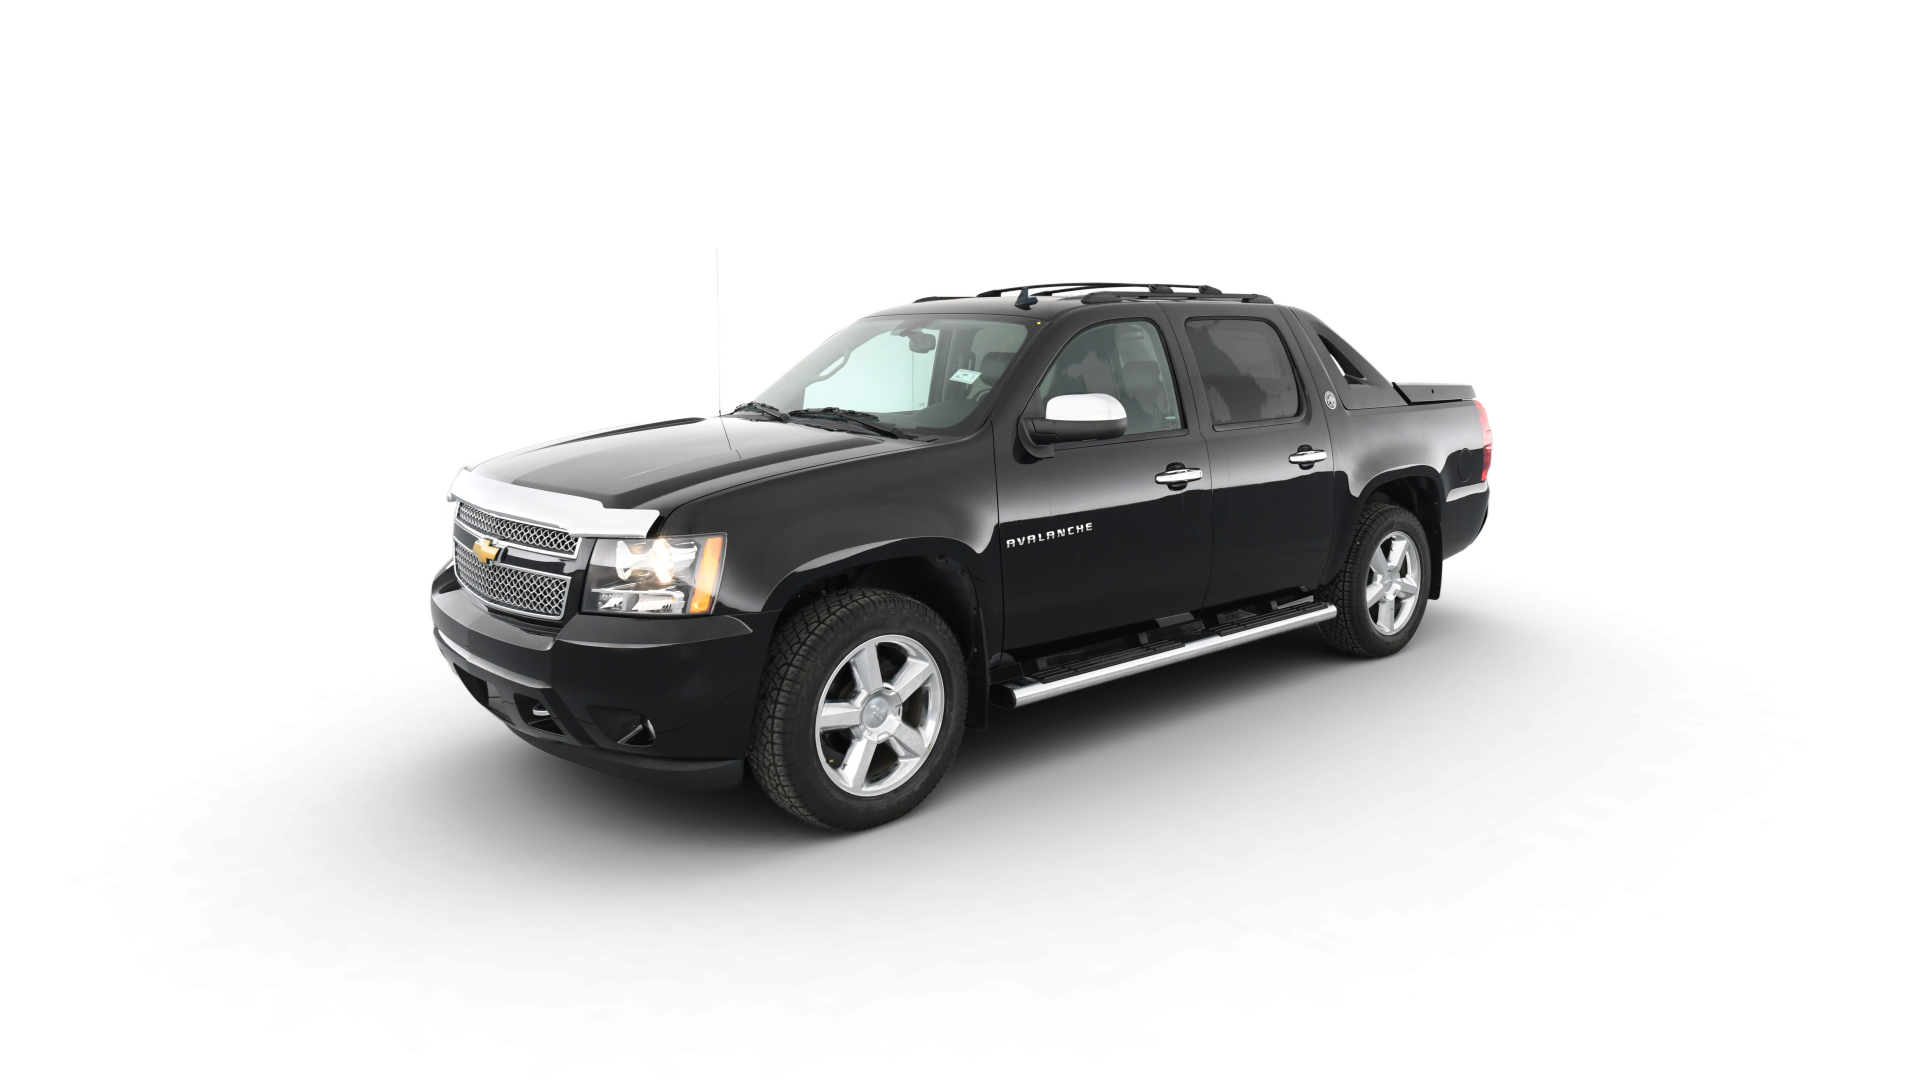 Used Chevrolet Avalanche For Sale Online | Carvana